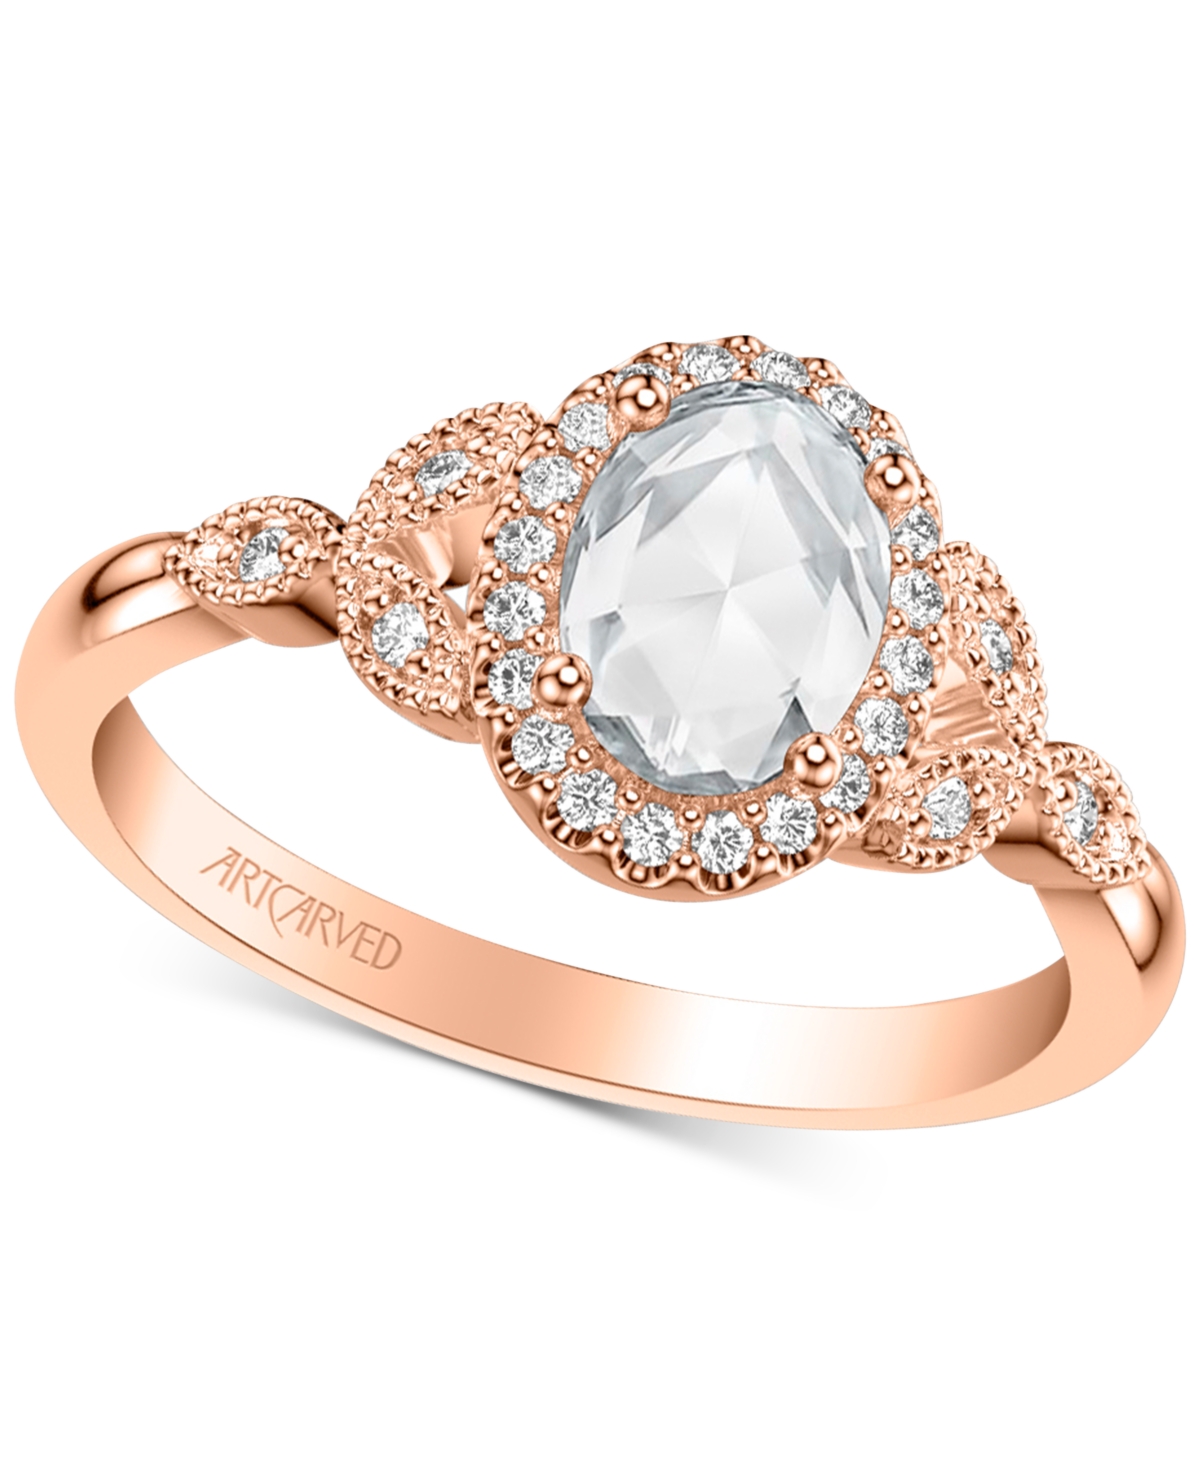 Artcarved Art Carved Diamond Rose-Cut Oval Engagement Ring (5/8 ct. t.w.) in 14k White, Yellow or Rose Gold